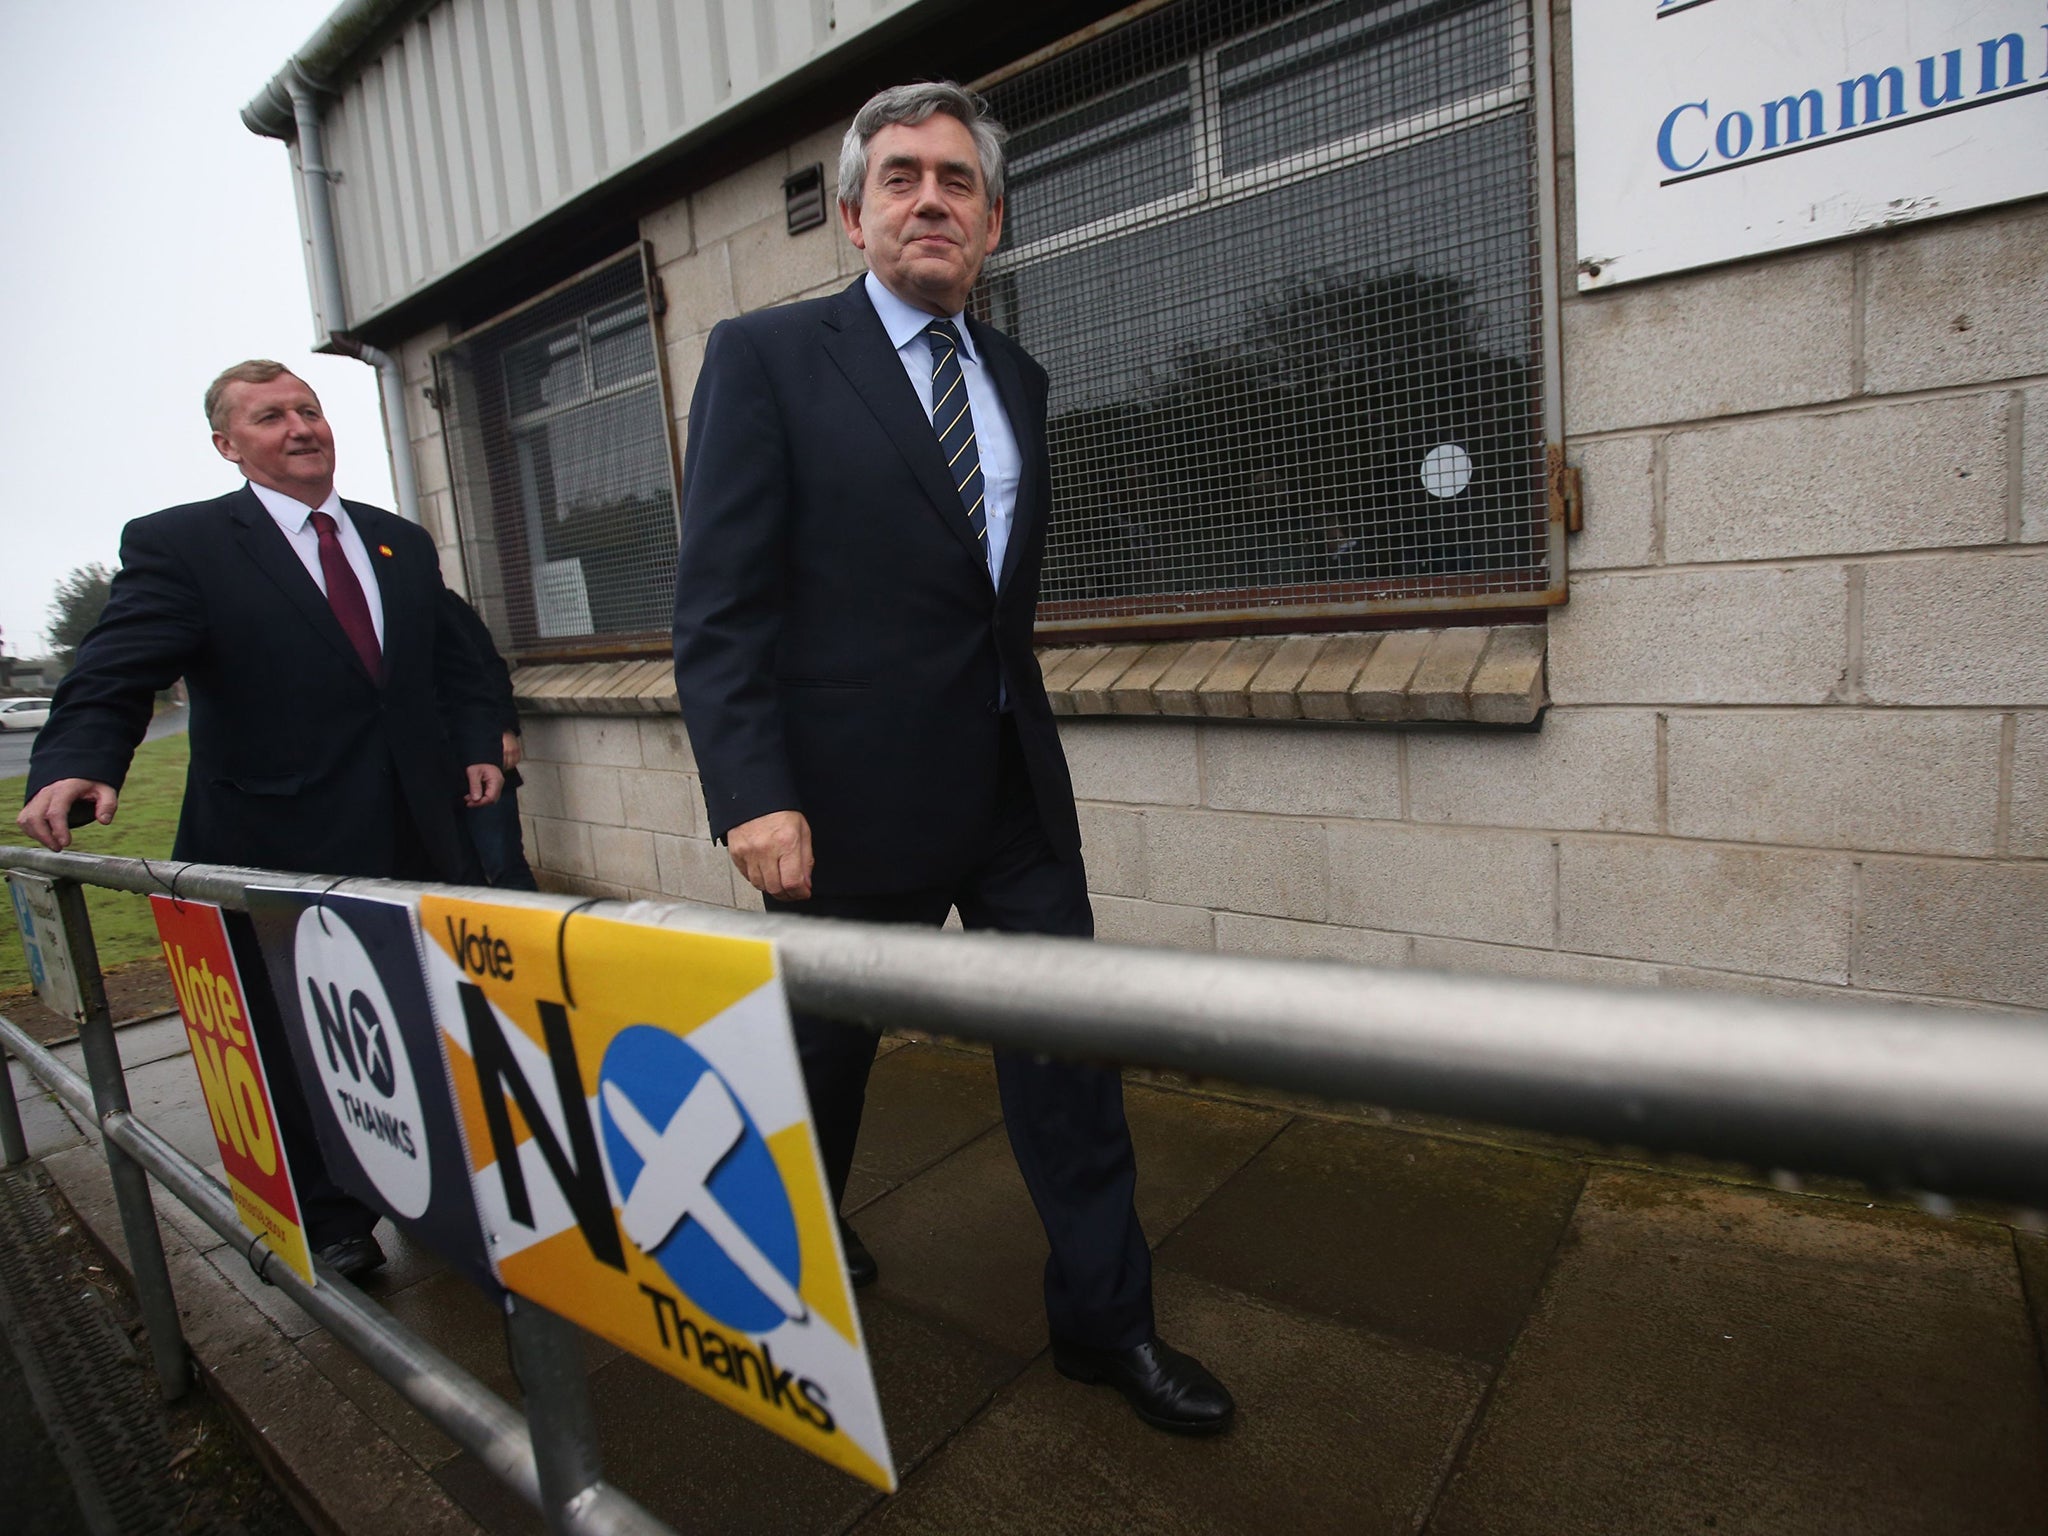 Former Prime Minister Gordon Brown with No campaigners outside the polling station at North Queensferry Community Centre as polls open